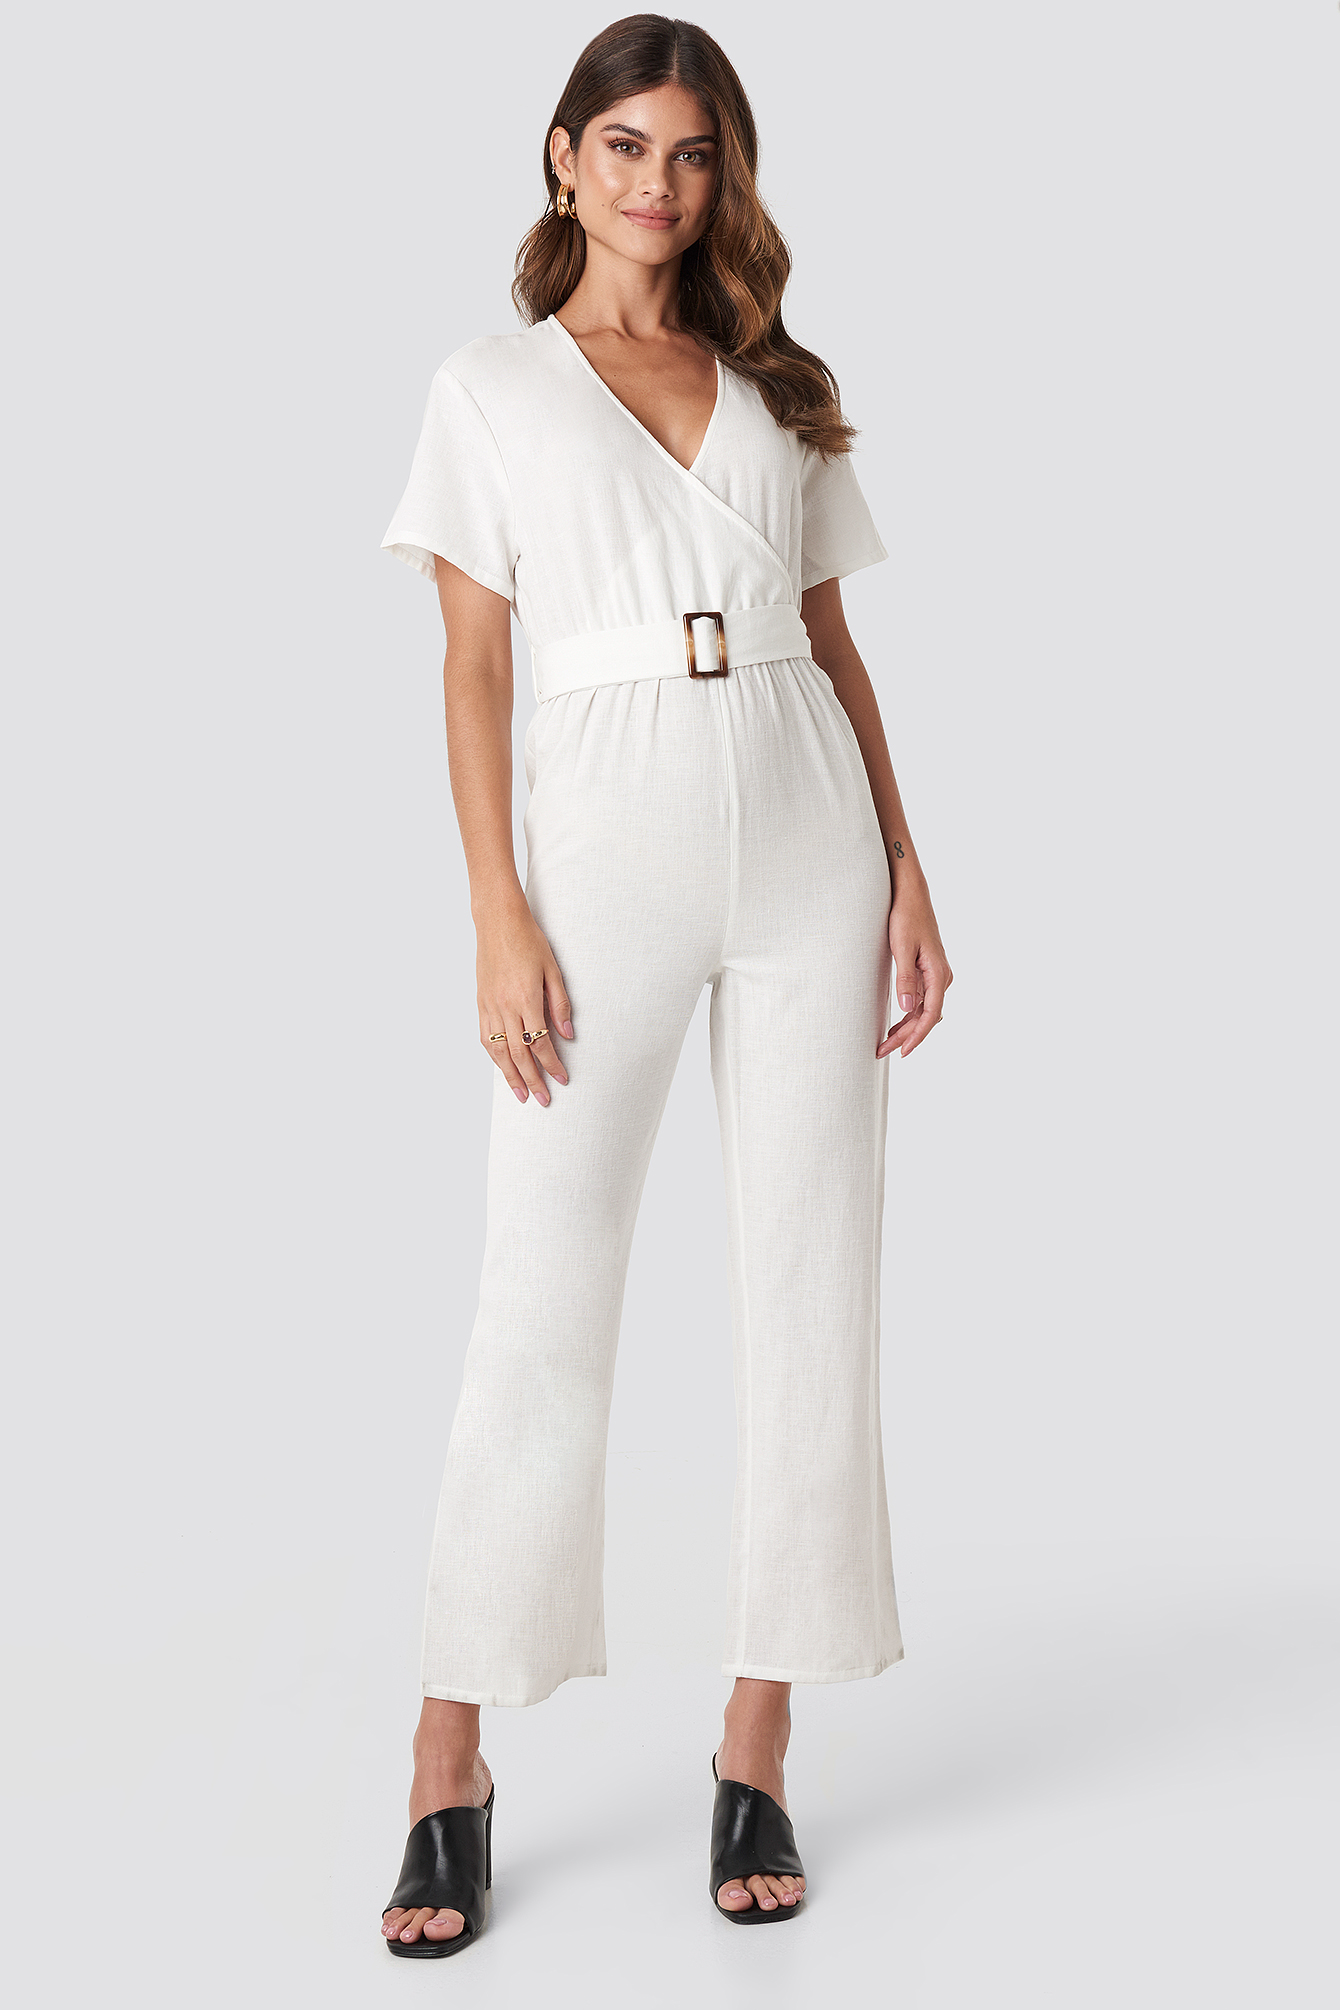 Off White Hannalicious x NA-KD Overlapped Belted Linen Look Jumpsuit